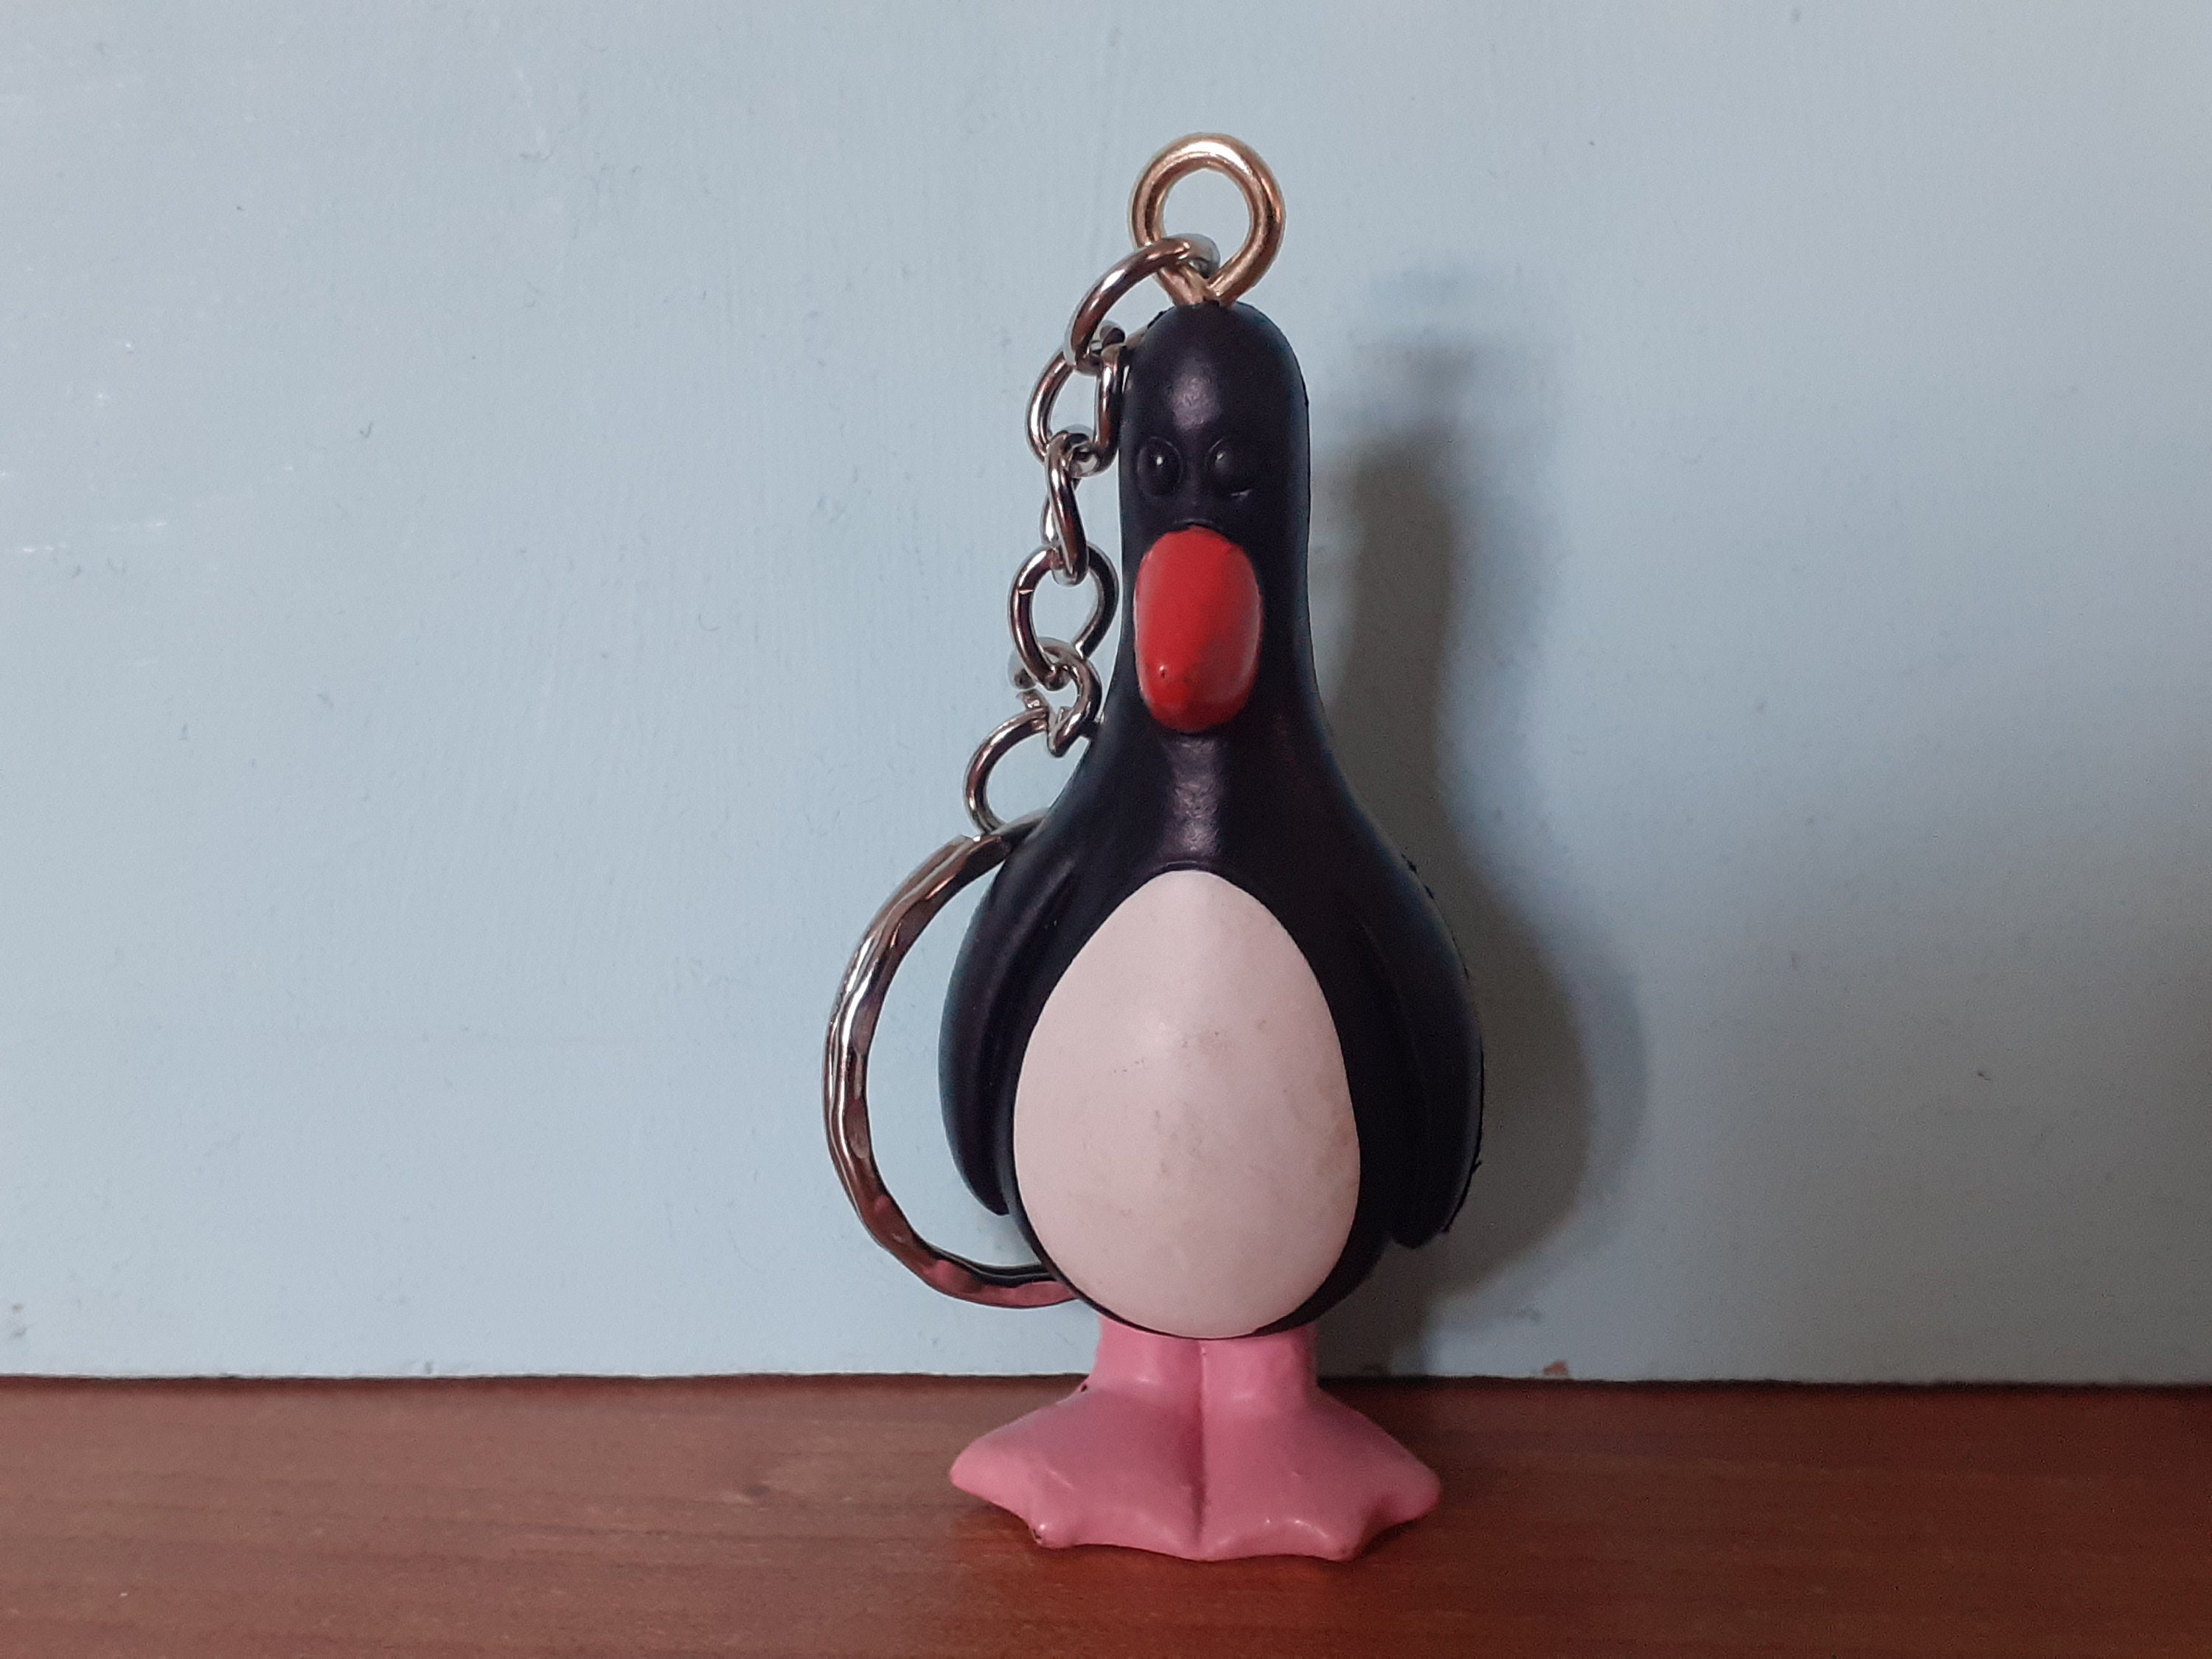 LEGO MOC Feathers McGraw the penguin - Wallace and Gromit by Runescope